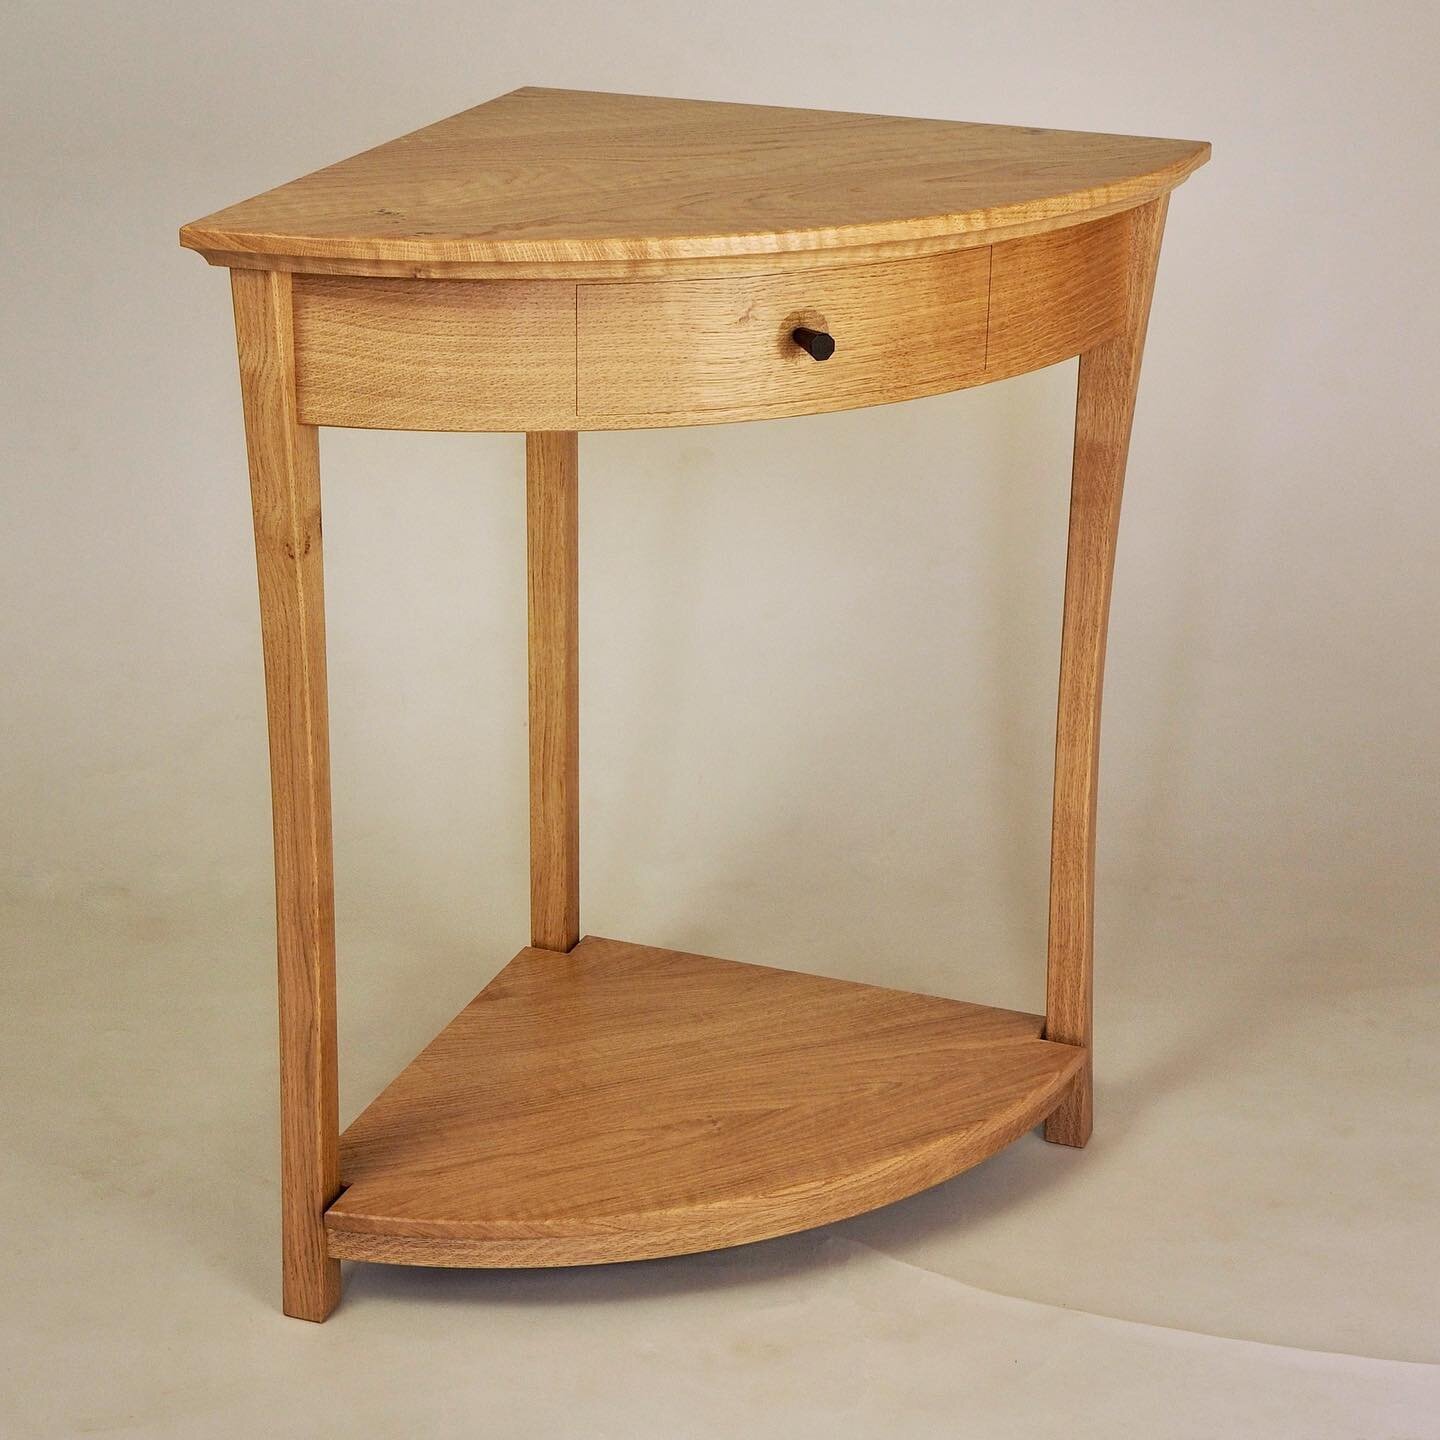 Delivered this little corner table yesterday. Made from the clients own oak and features a laminated curved front rail with inset drawer. Lovely little fumed oak handle to finish. 
#sfmamembers #scottishfurnituremakersassociation #furnituredesign #fu